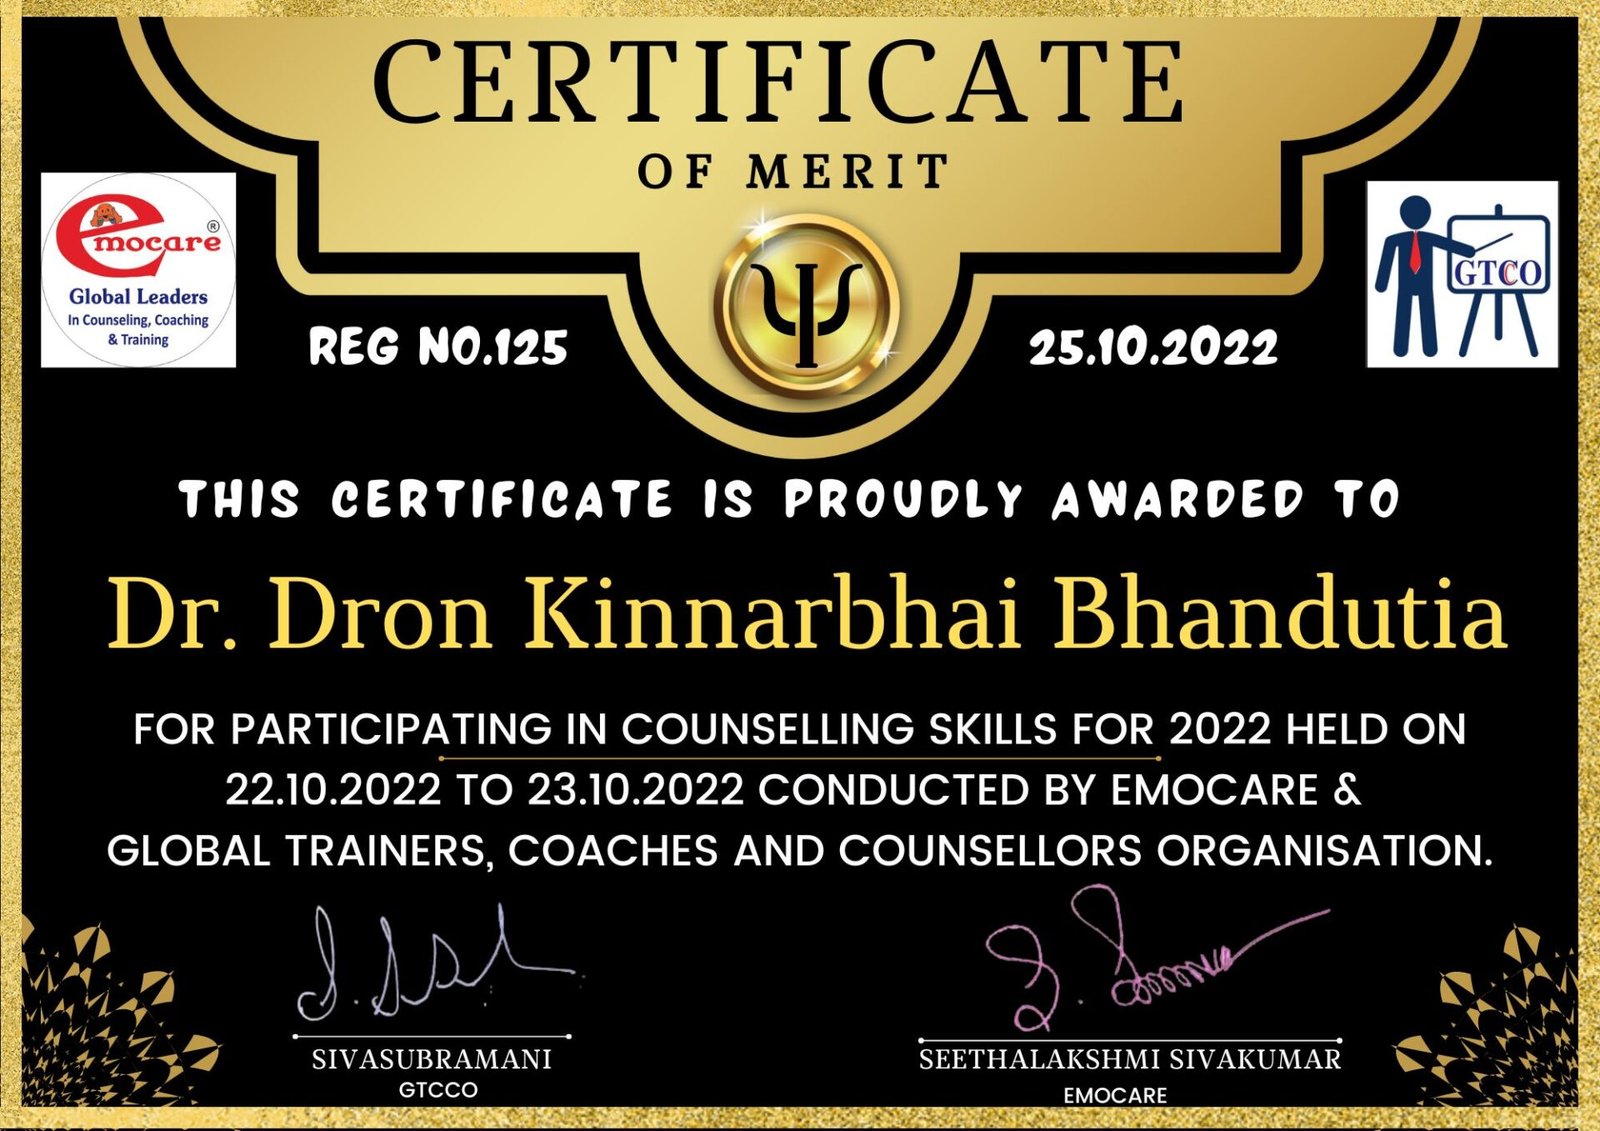 Online Training about Counselling Skills